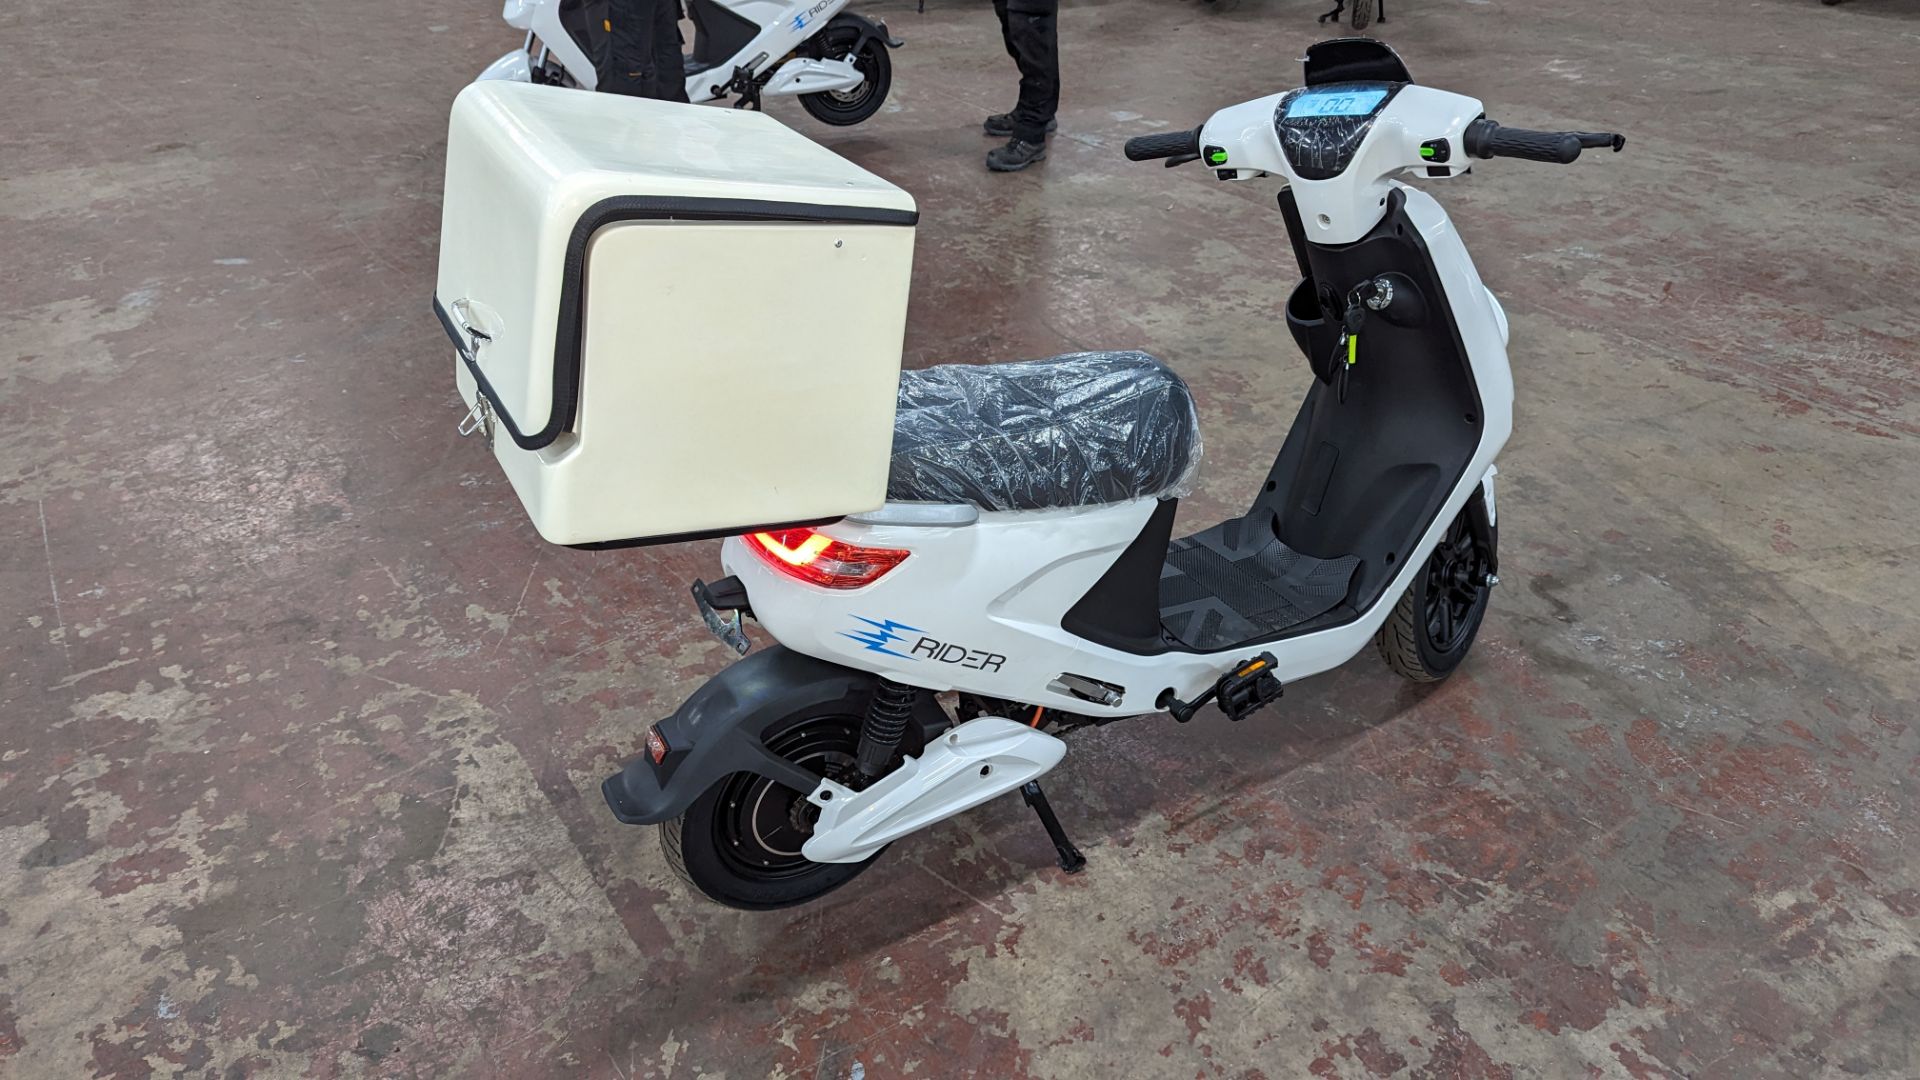 Model 18 Electric Bike: Zero (0) recorded miles, white body with black detailing, insulated box moun - Image 5 of 13